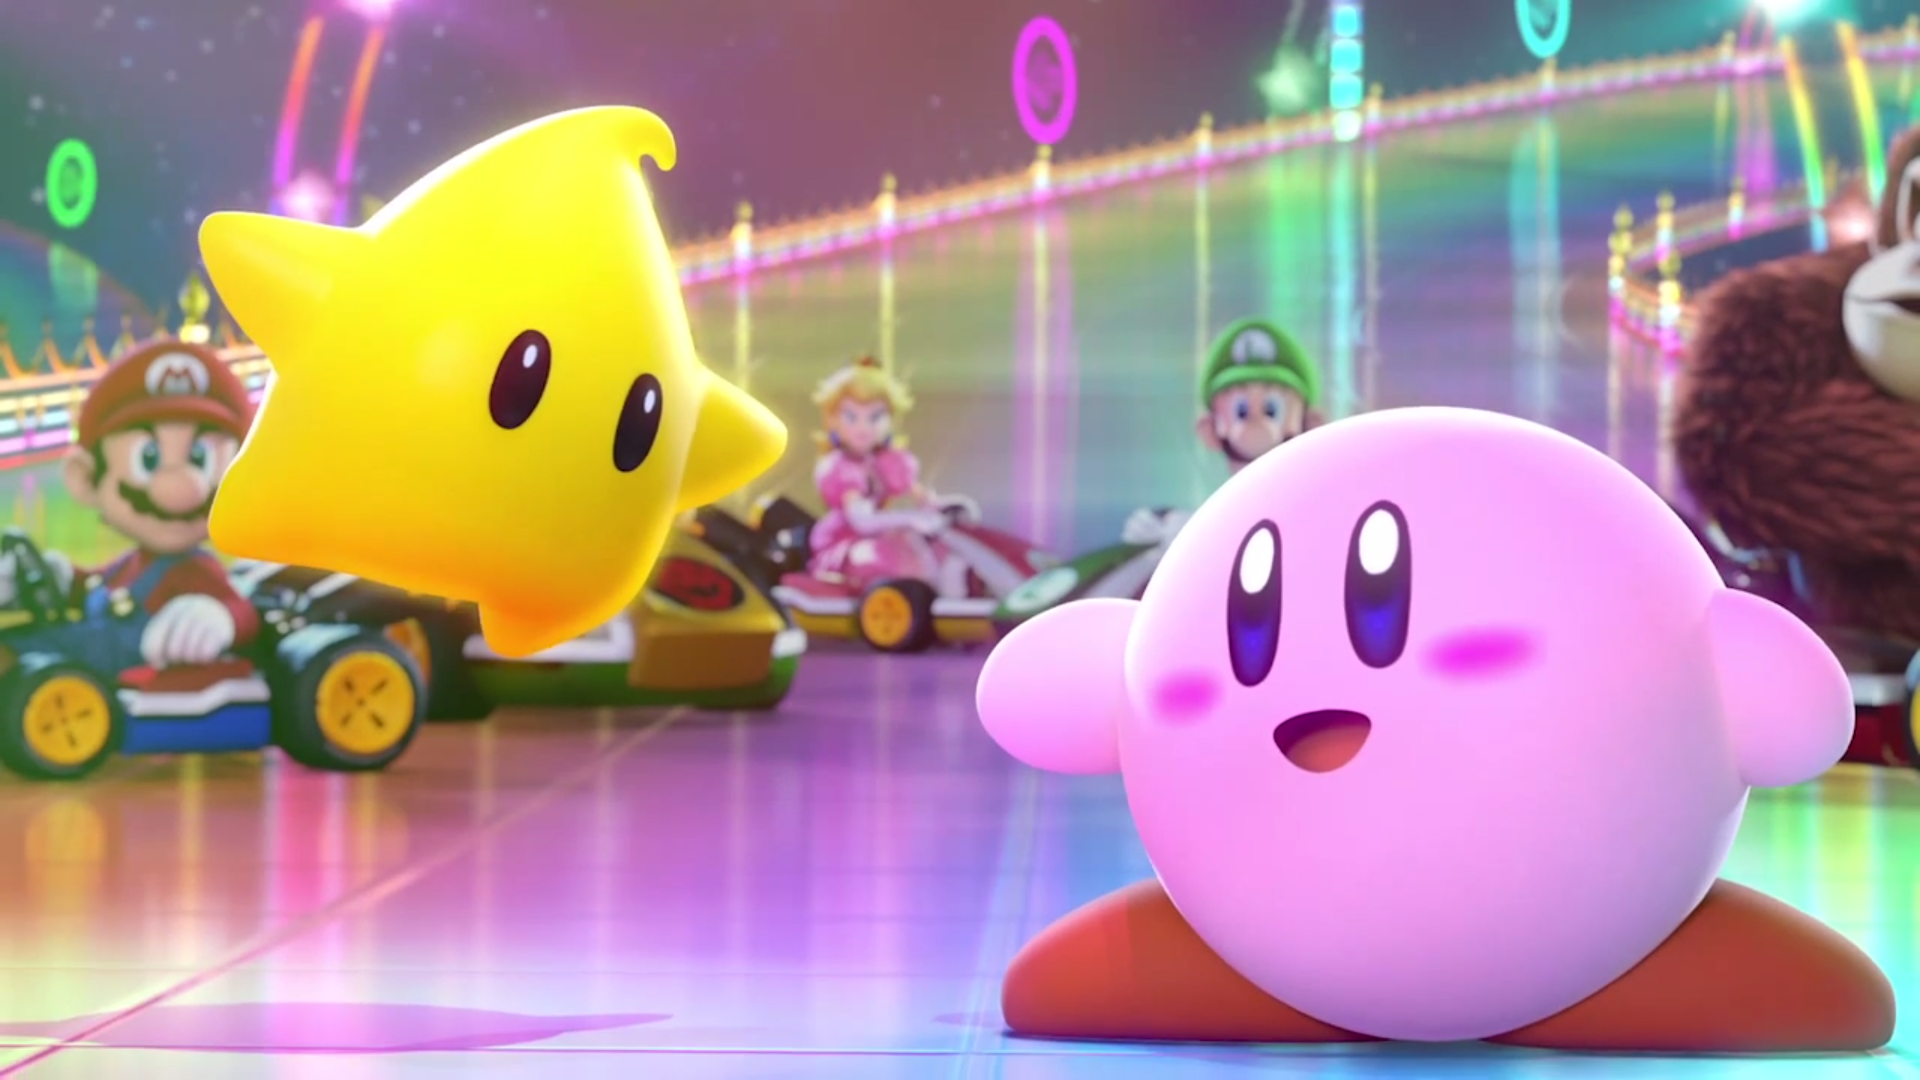 kirby on star download free